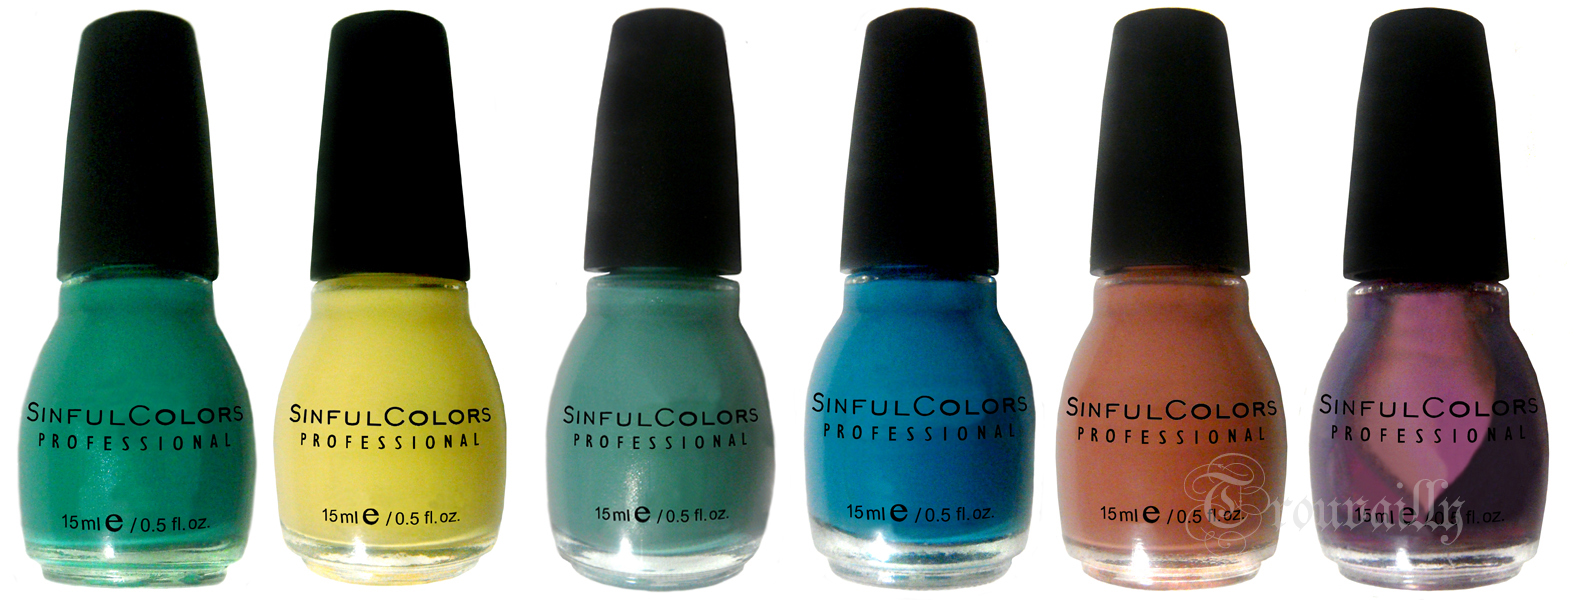 Sinful Colors Professional Nail Polish, Blue By You - wide 6